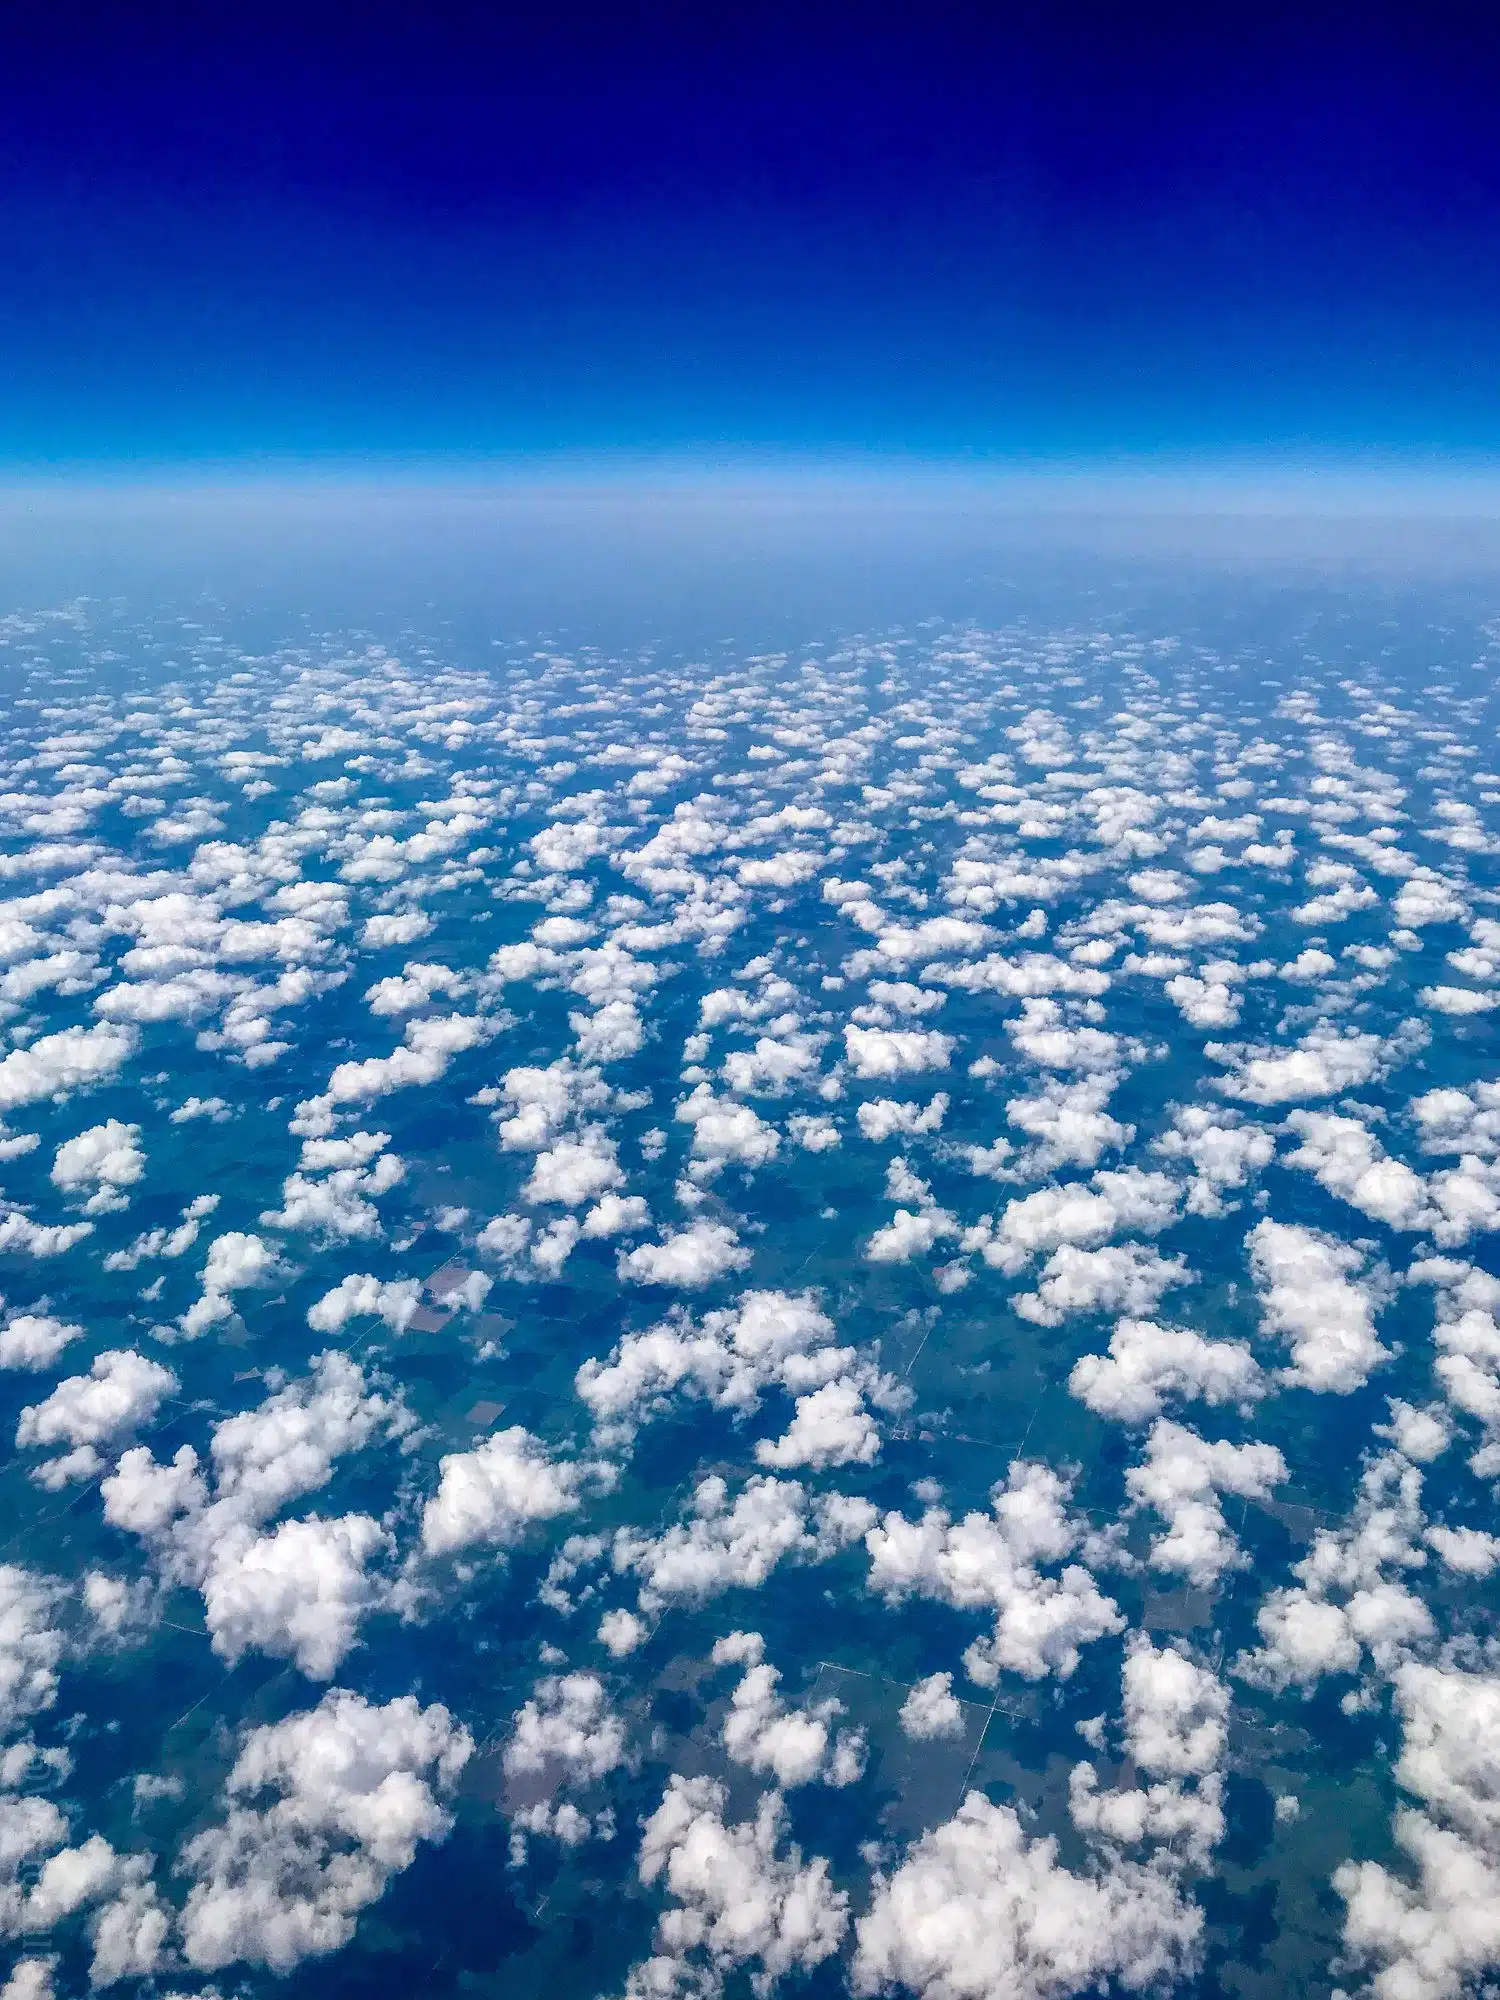 Clouds seen on my flight to Minneapolis.